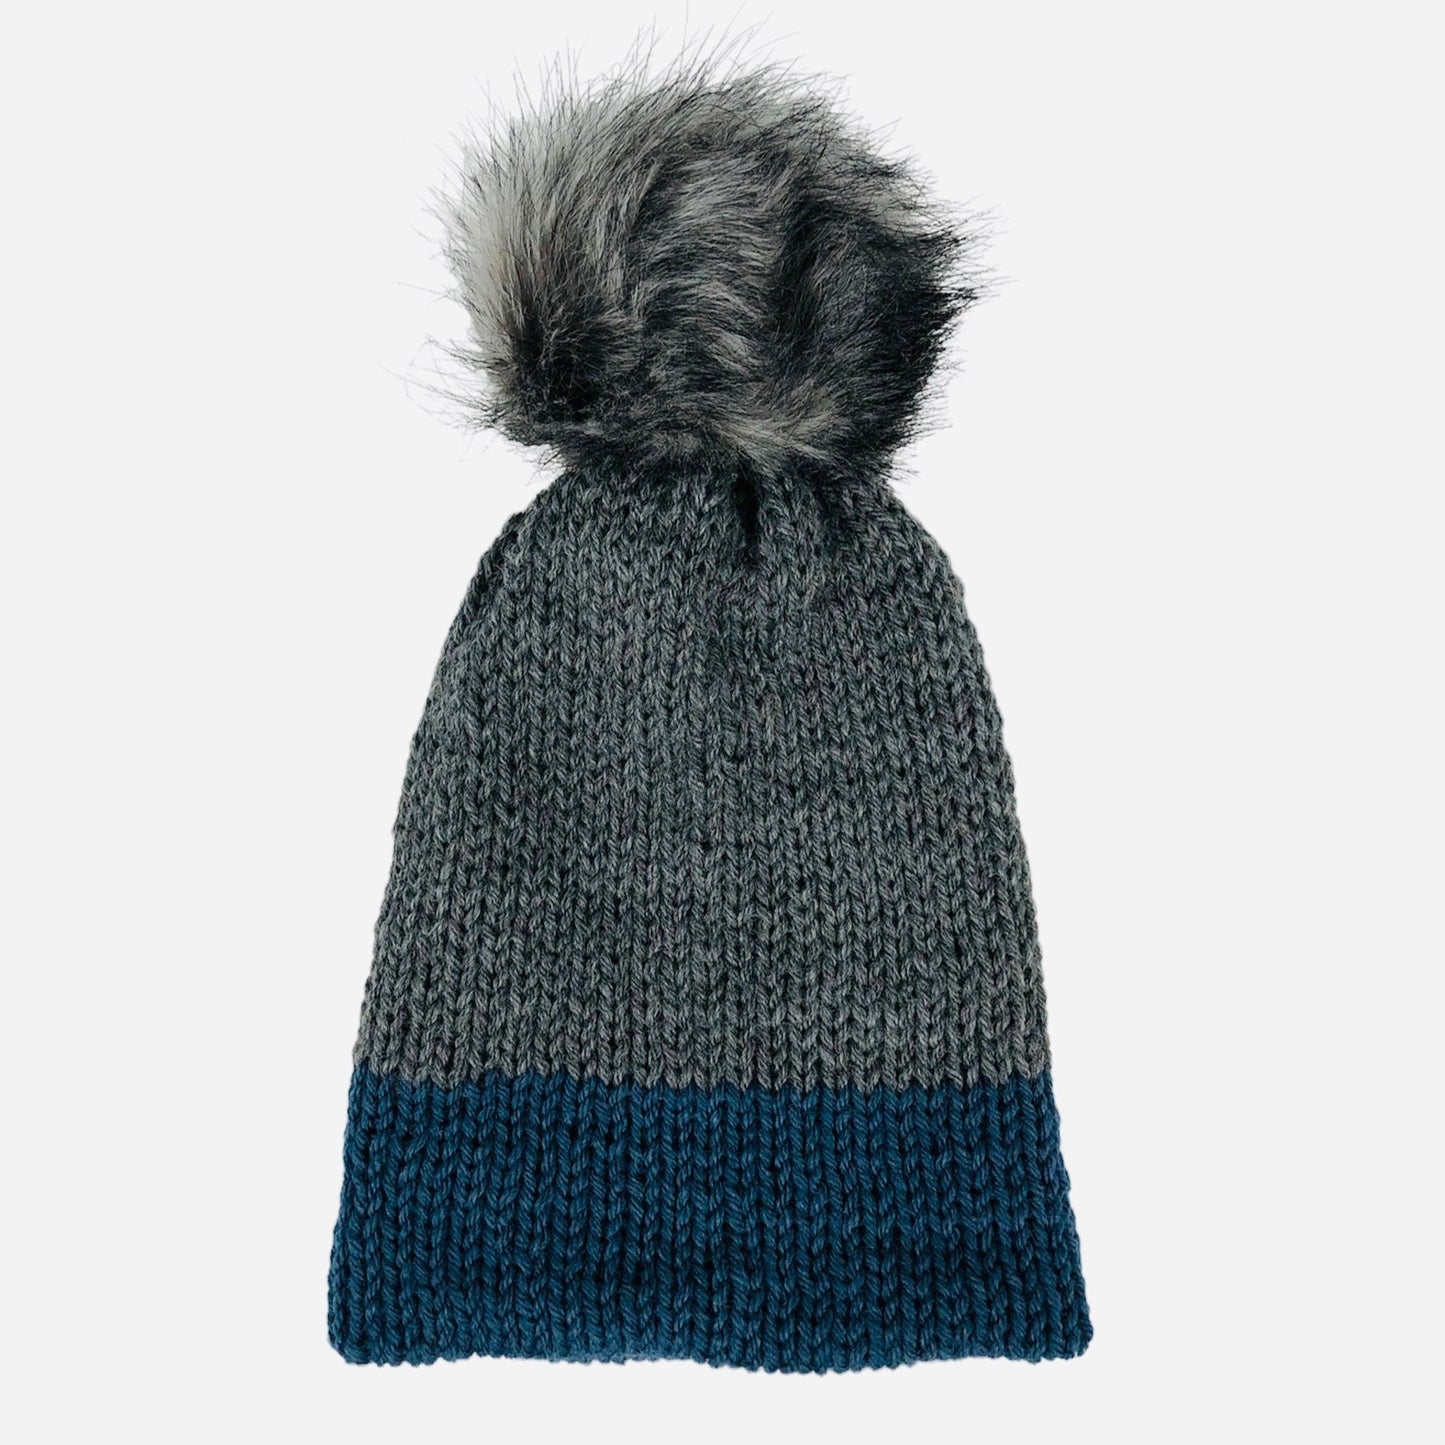 Gray and Blue Winter Hat